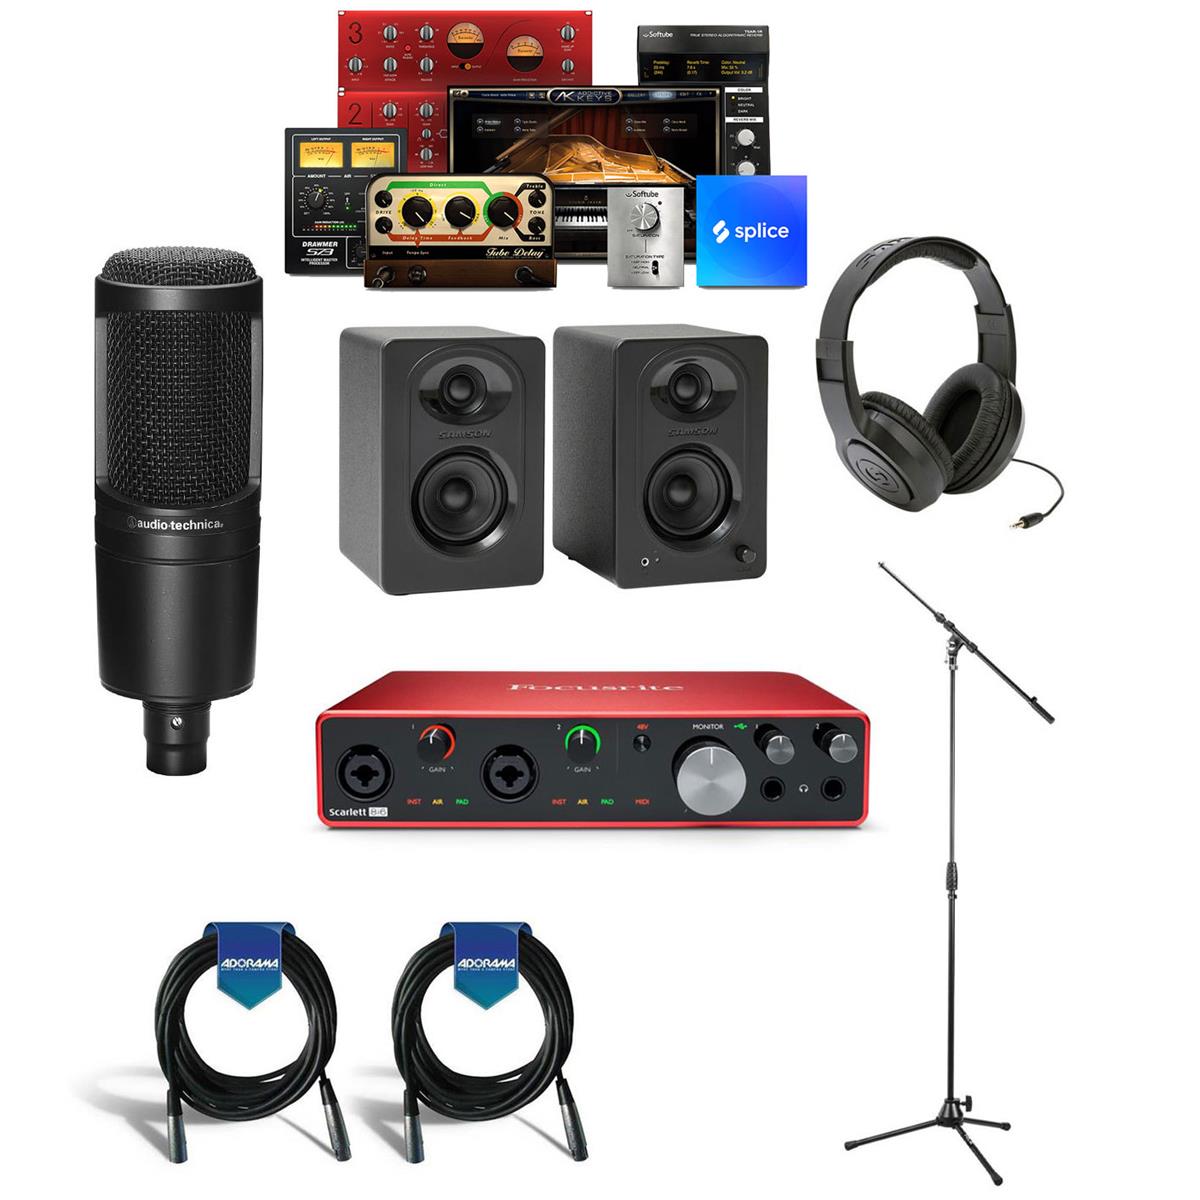 Adorama Recording Bundle - Focusrite Scarlett 8i6 Audio interface, AT 2020 Microphone, 2x Mackie CR3-X3 Monitor Speakers, Mic Stand, 2 XML Cables - $420